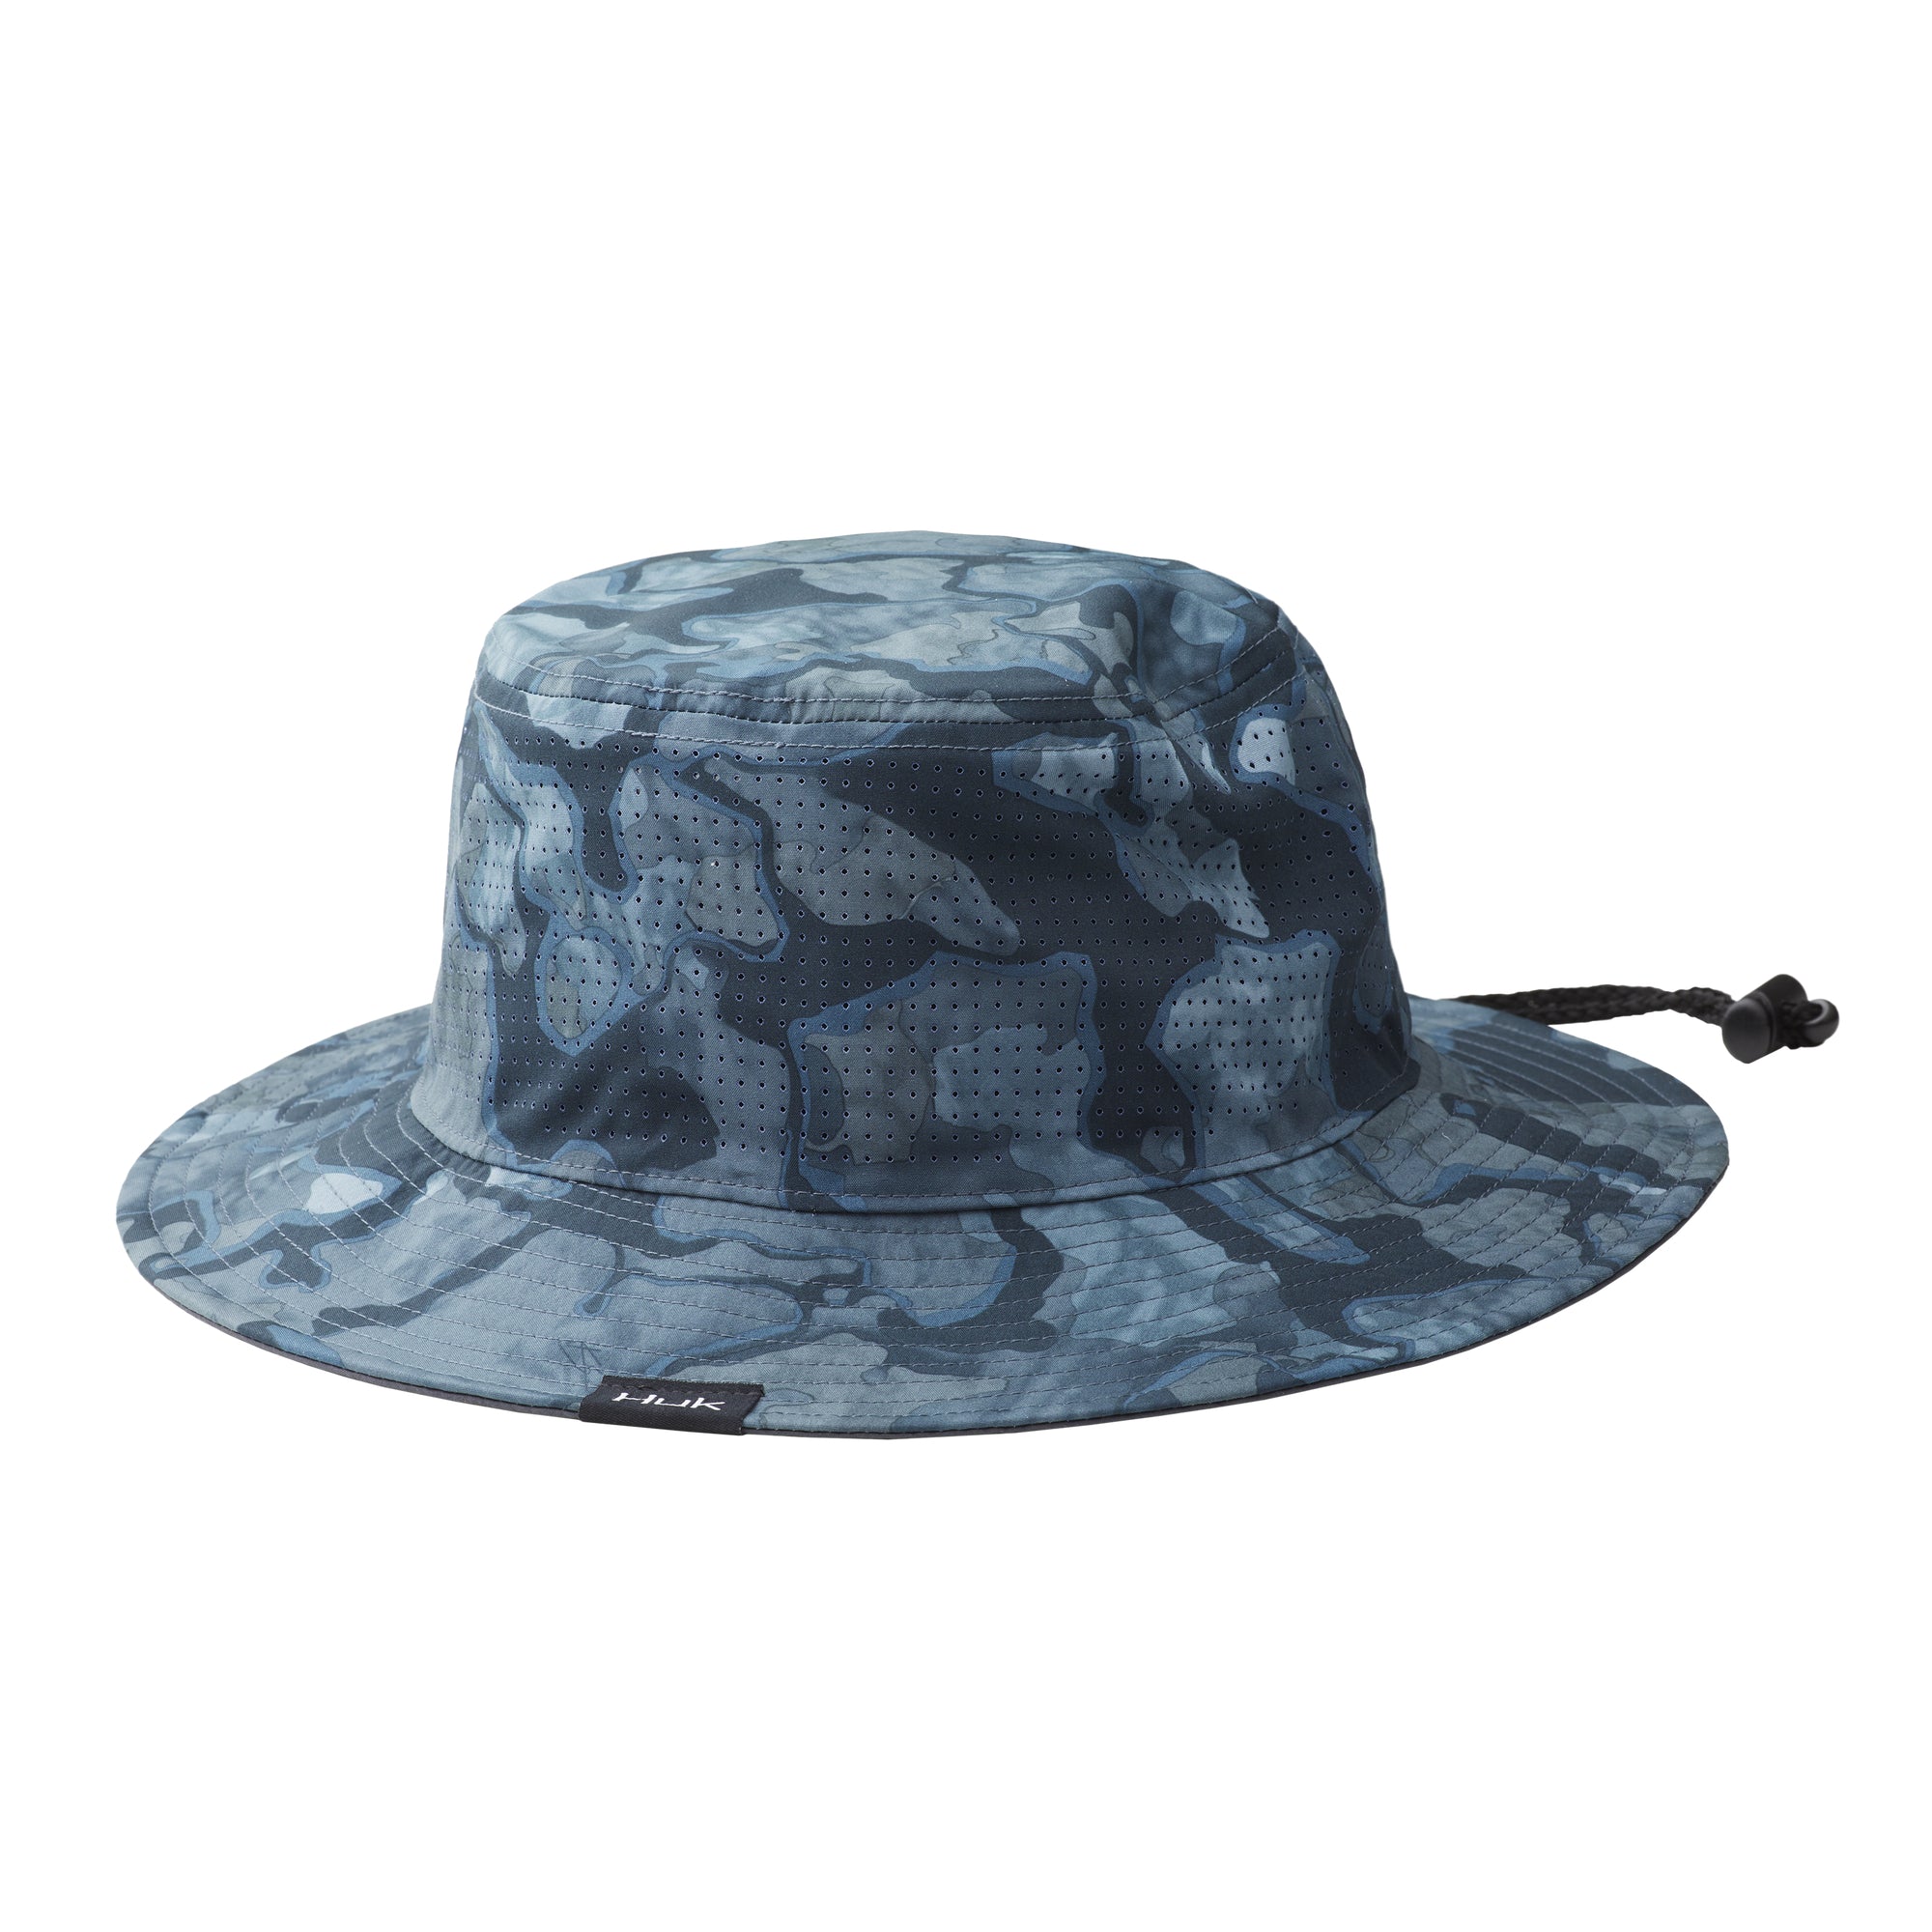 Huk Current Camo Bucket Fishing Hat – Natural Sports - The Fishing